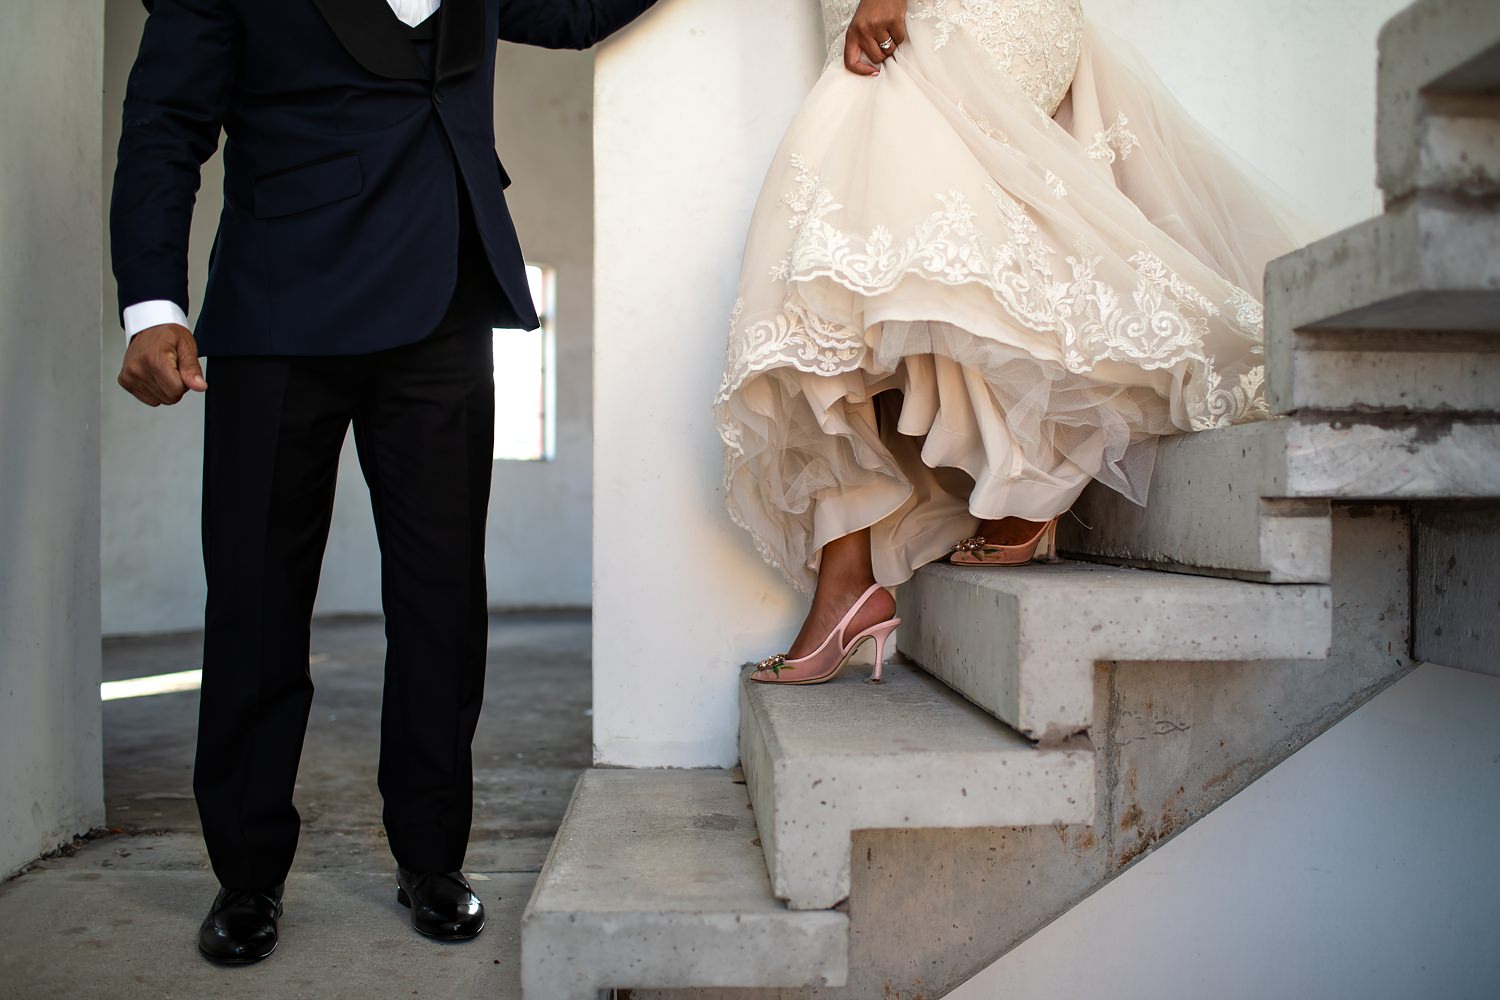 The groom helps the bride down concrete stairs during their wedding photography session by wedding photographer in South Africa, Niki M Photography